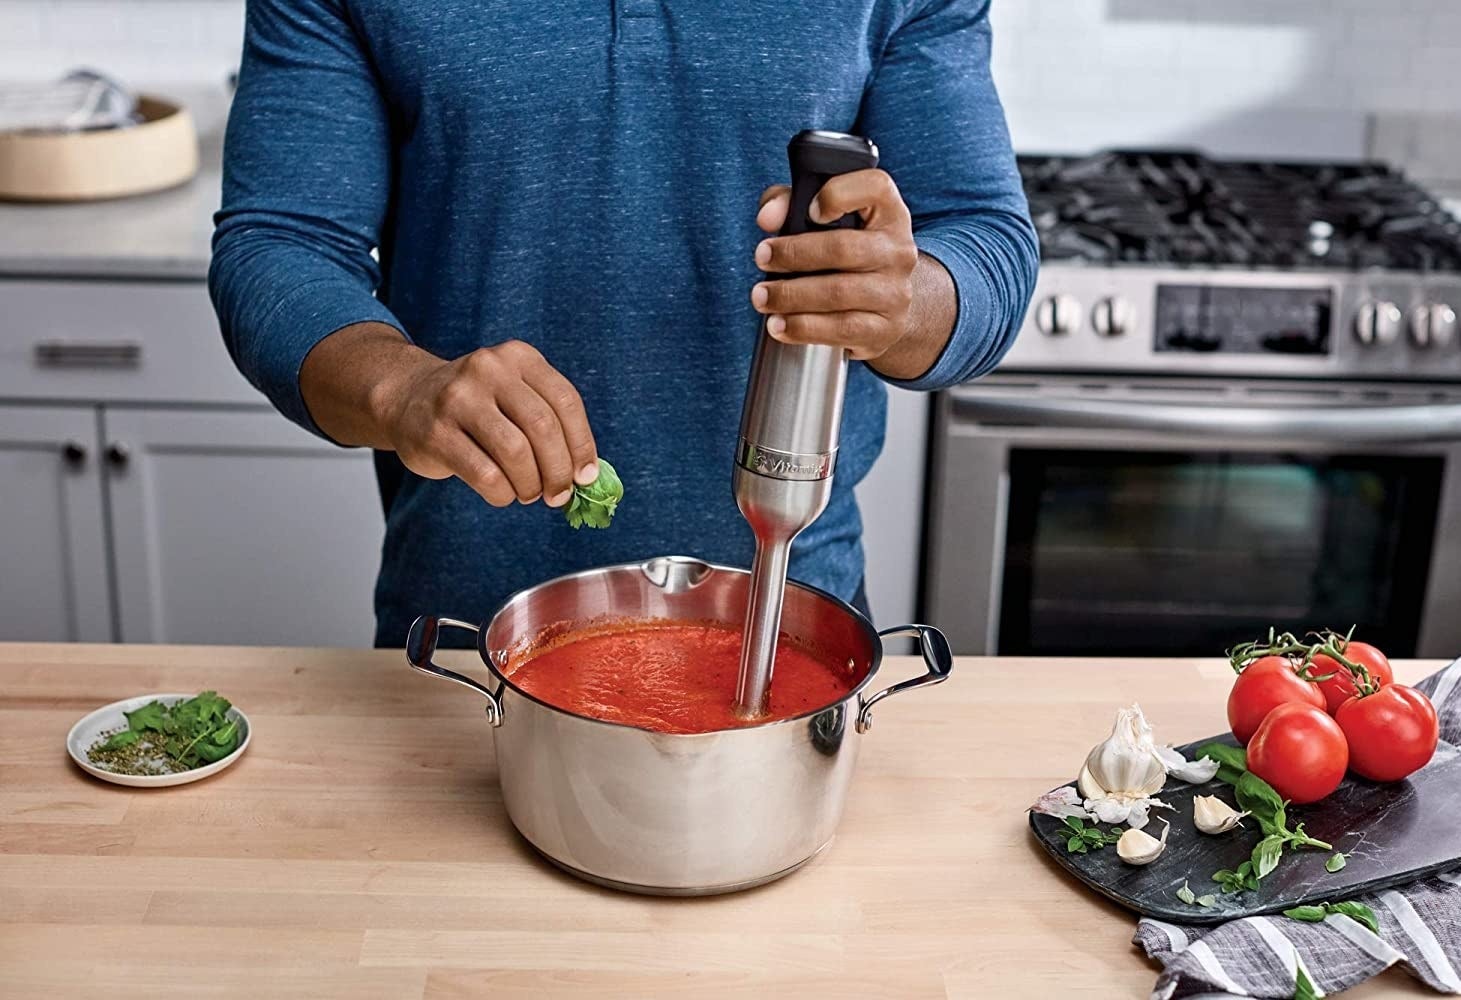 A person using the immersion blender to make pasta sauce